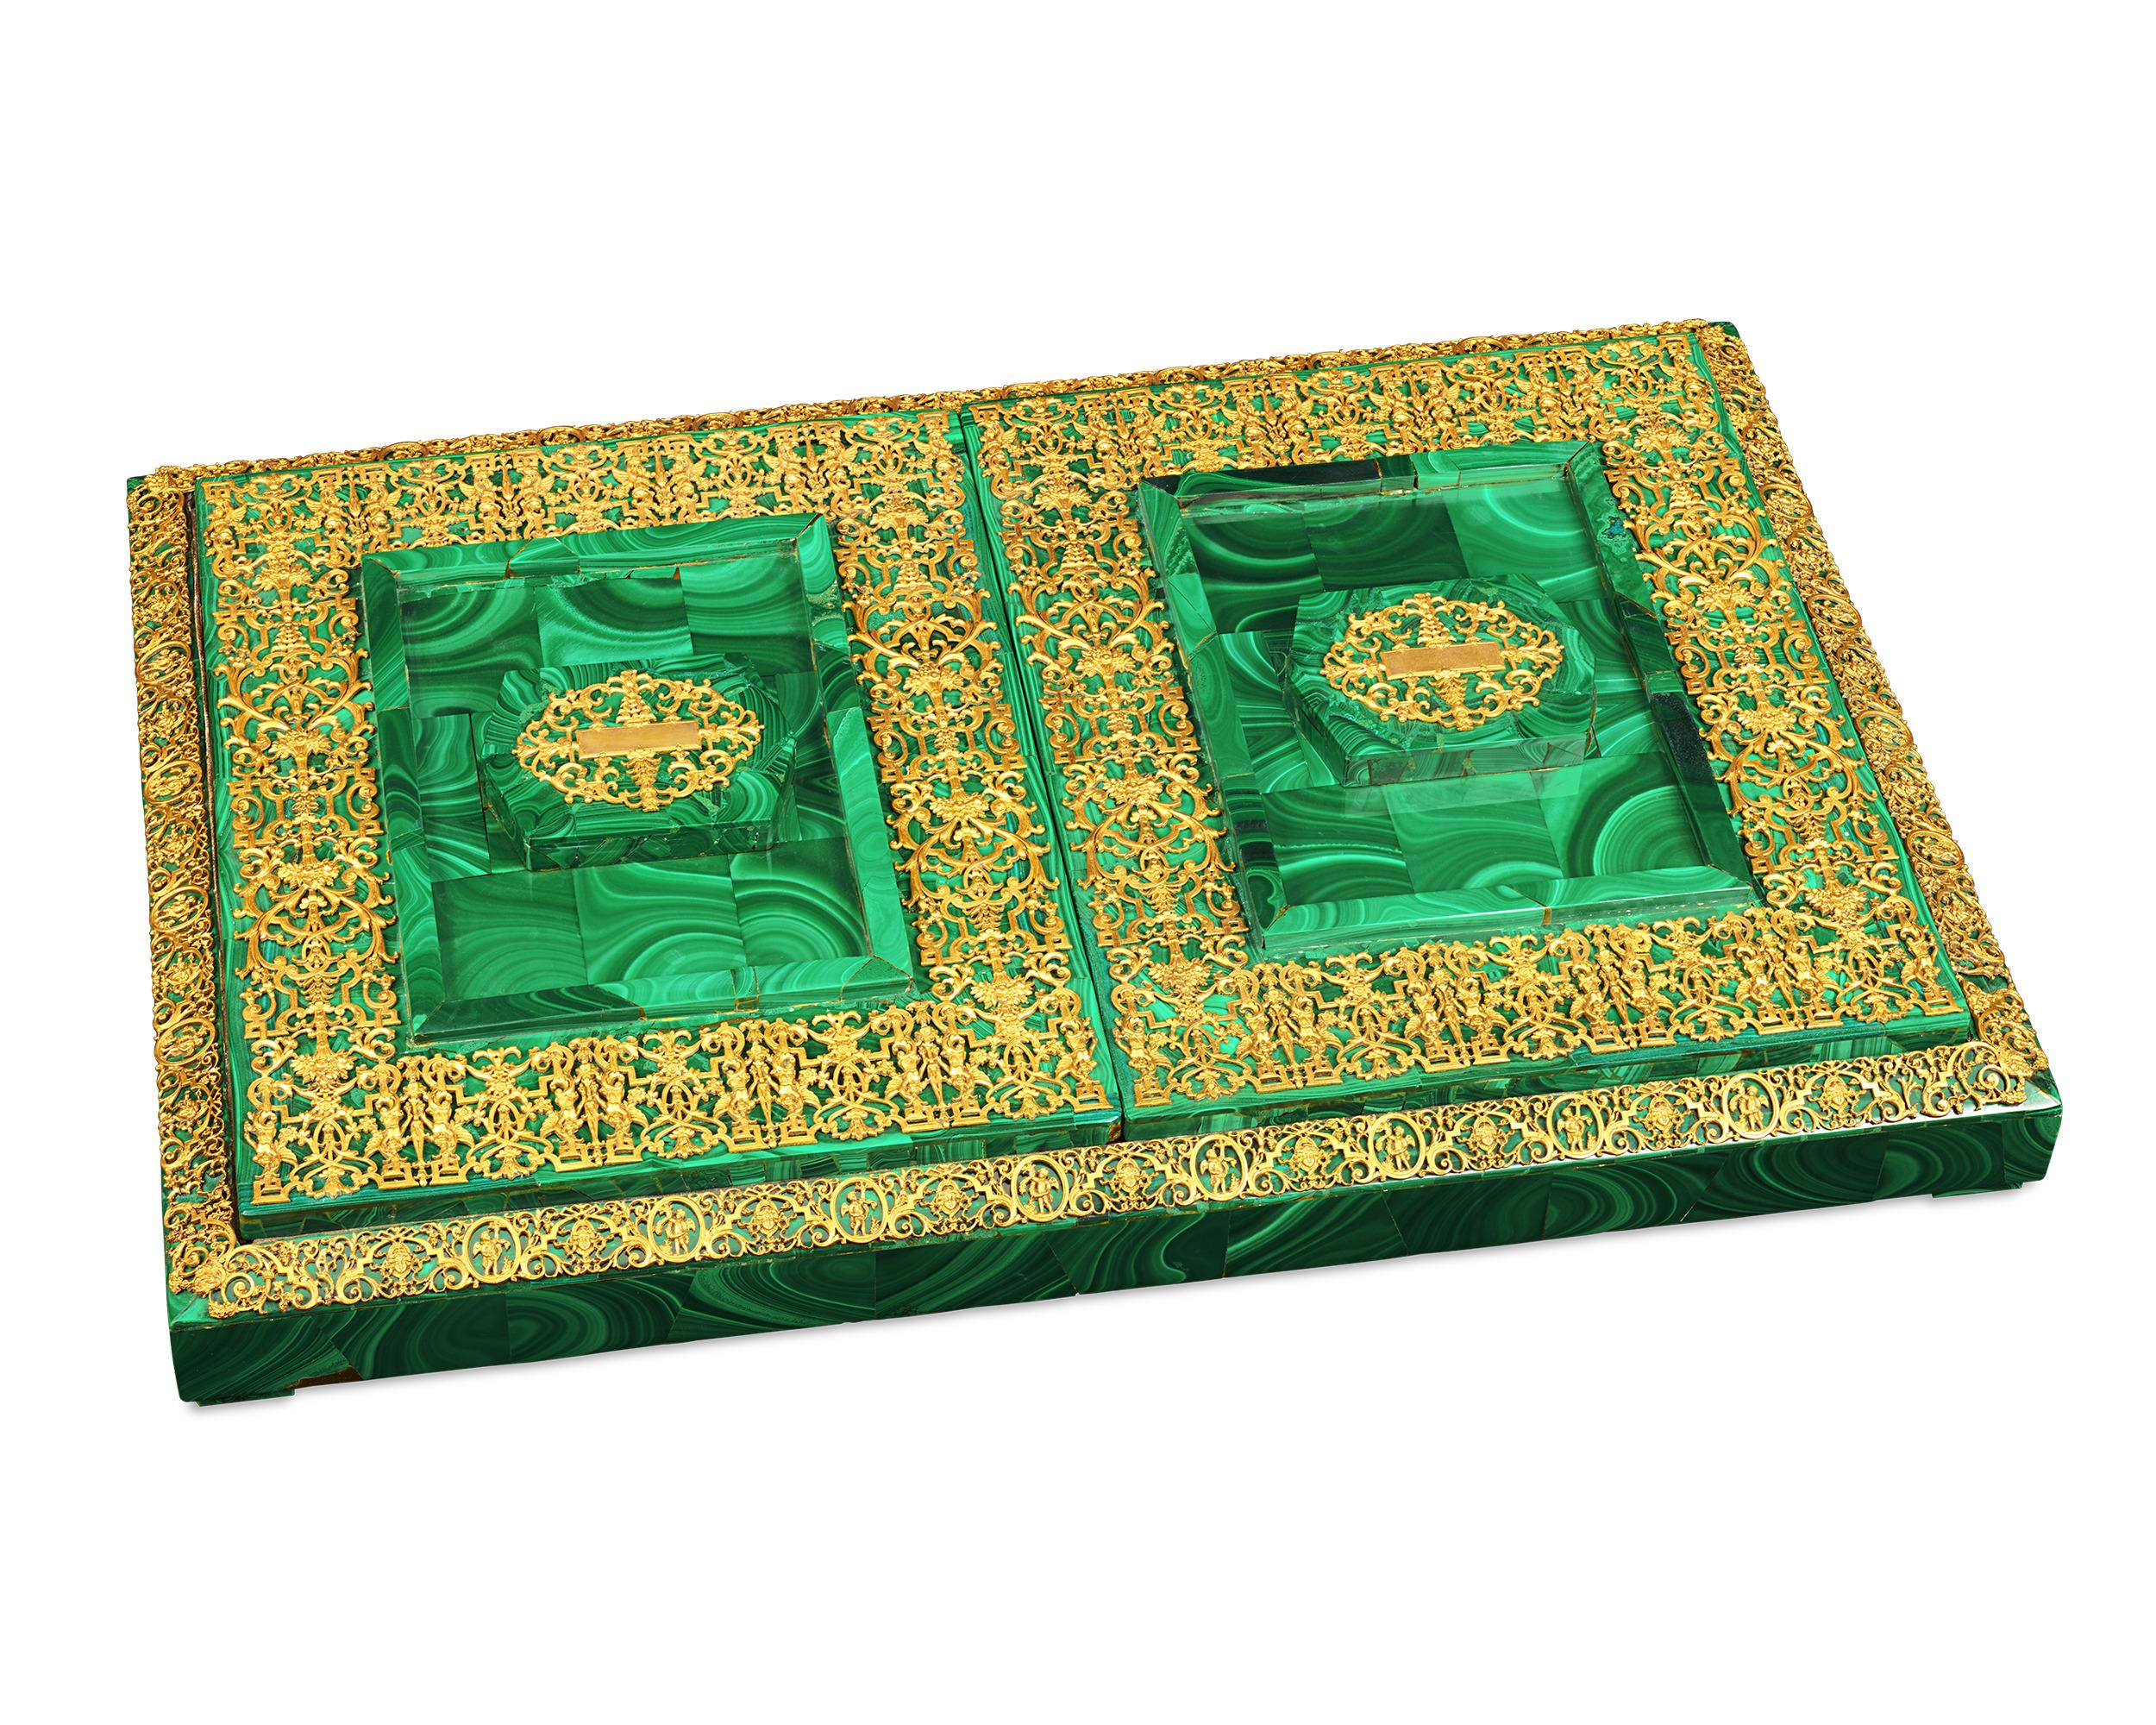 This stunning malachite backgammon set is almost certainly one-of-a-kind. Handcrafted of malachite, gilt brass and dyed leather, the favorite household game takes a luxurious form in this exquisite objet d’art. The backgammon board is cleverly